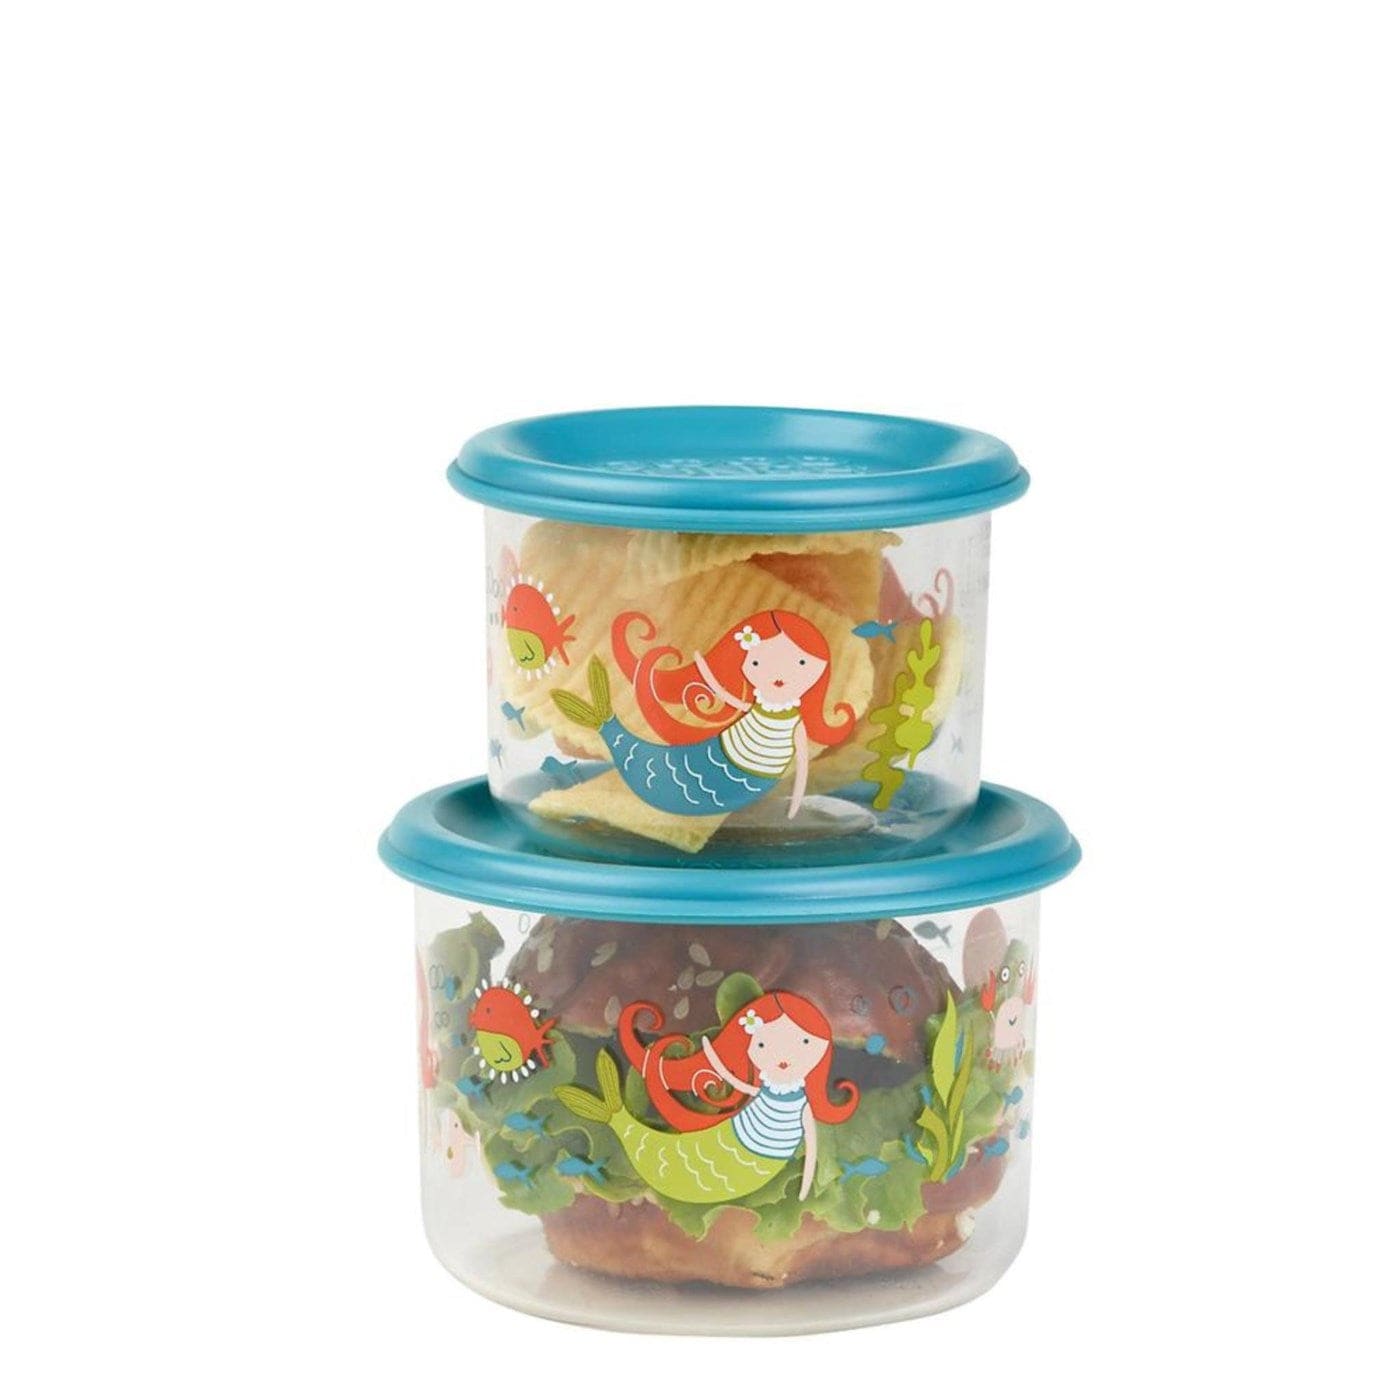 Sugar Booger snack container set Sugar Booger Good Lunch Snack Container 2 PC Set - Isla the Mermaid